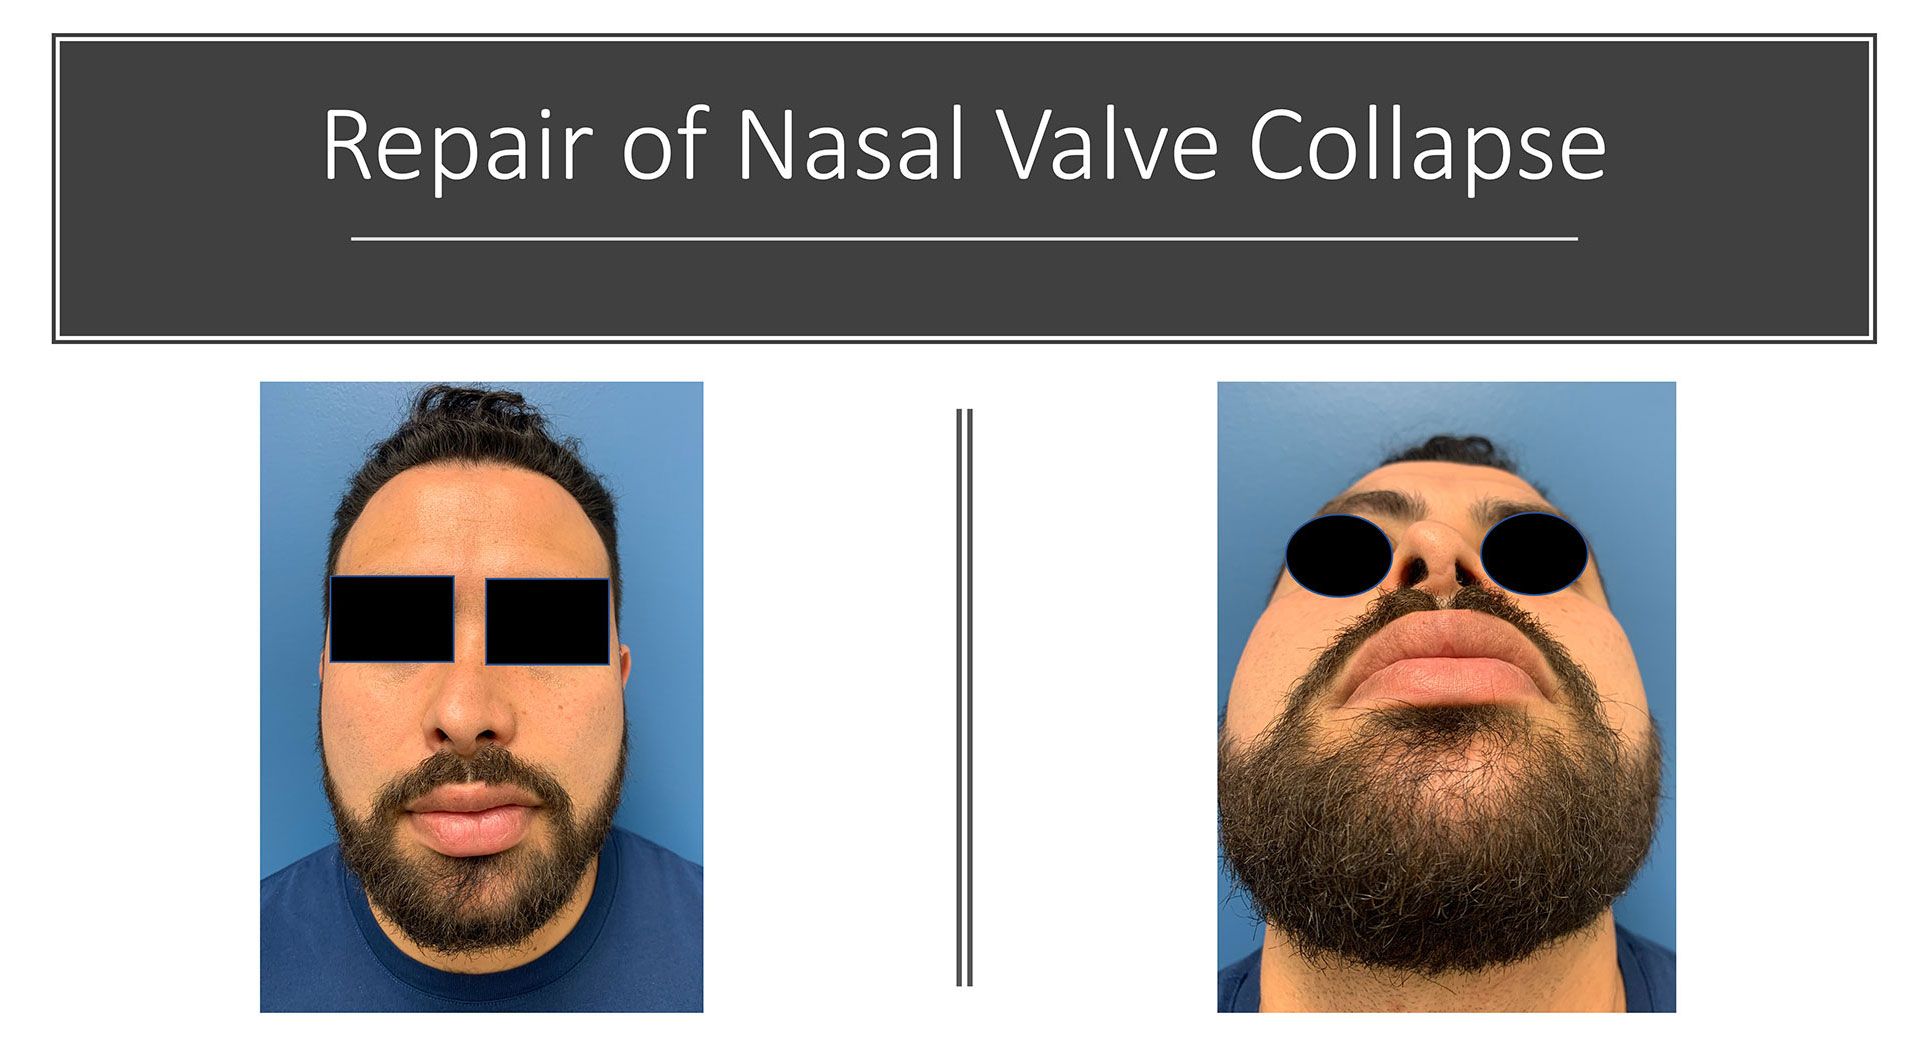 Repair of Nasal Valve Collapse After